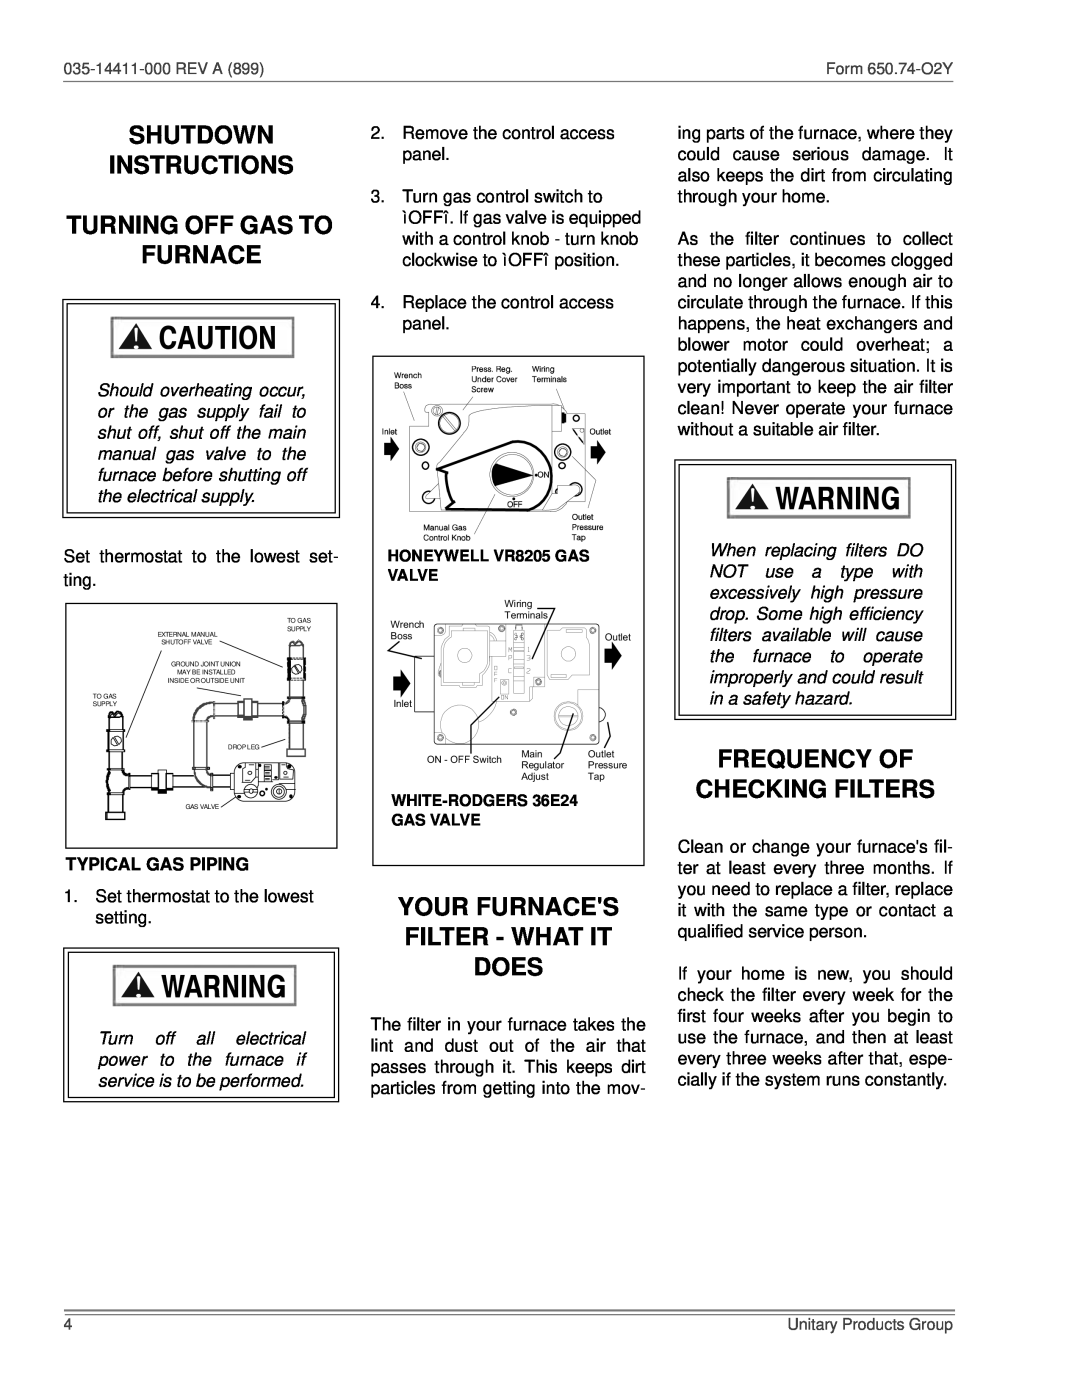 White Rodgers 80 Shutdown Instructions Turning Off Gas To Furnace, Frequency Of Checking Filters, Typical Gas Piping 